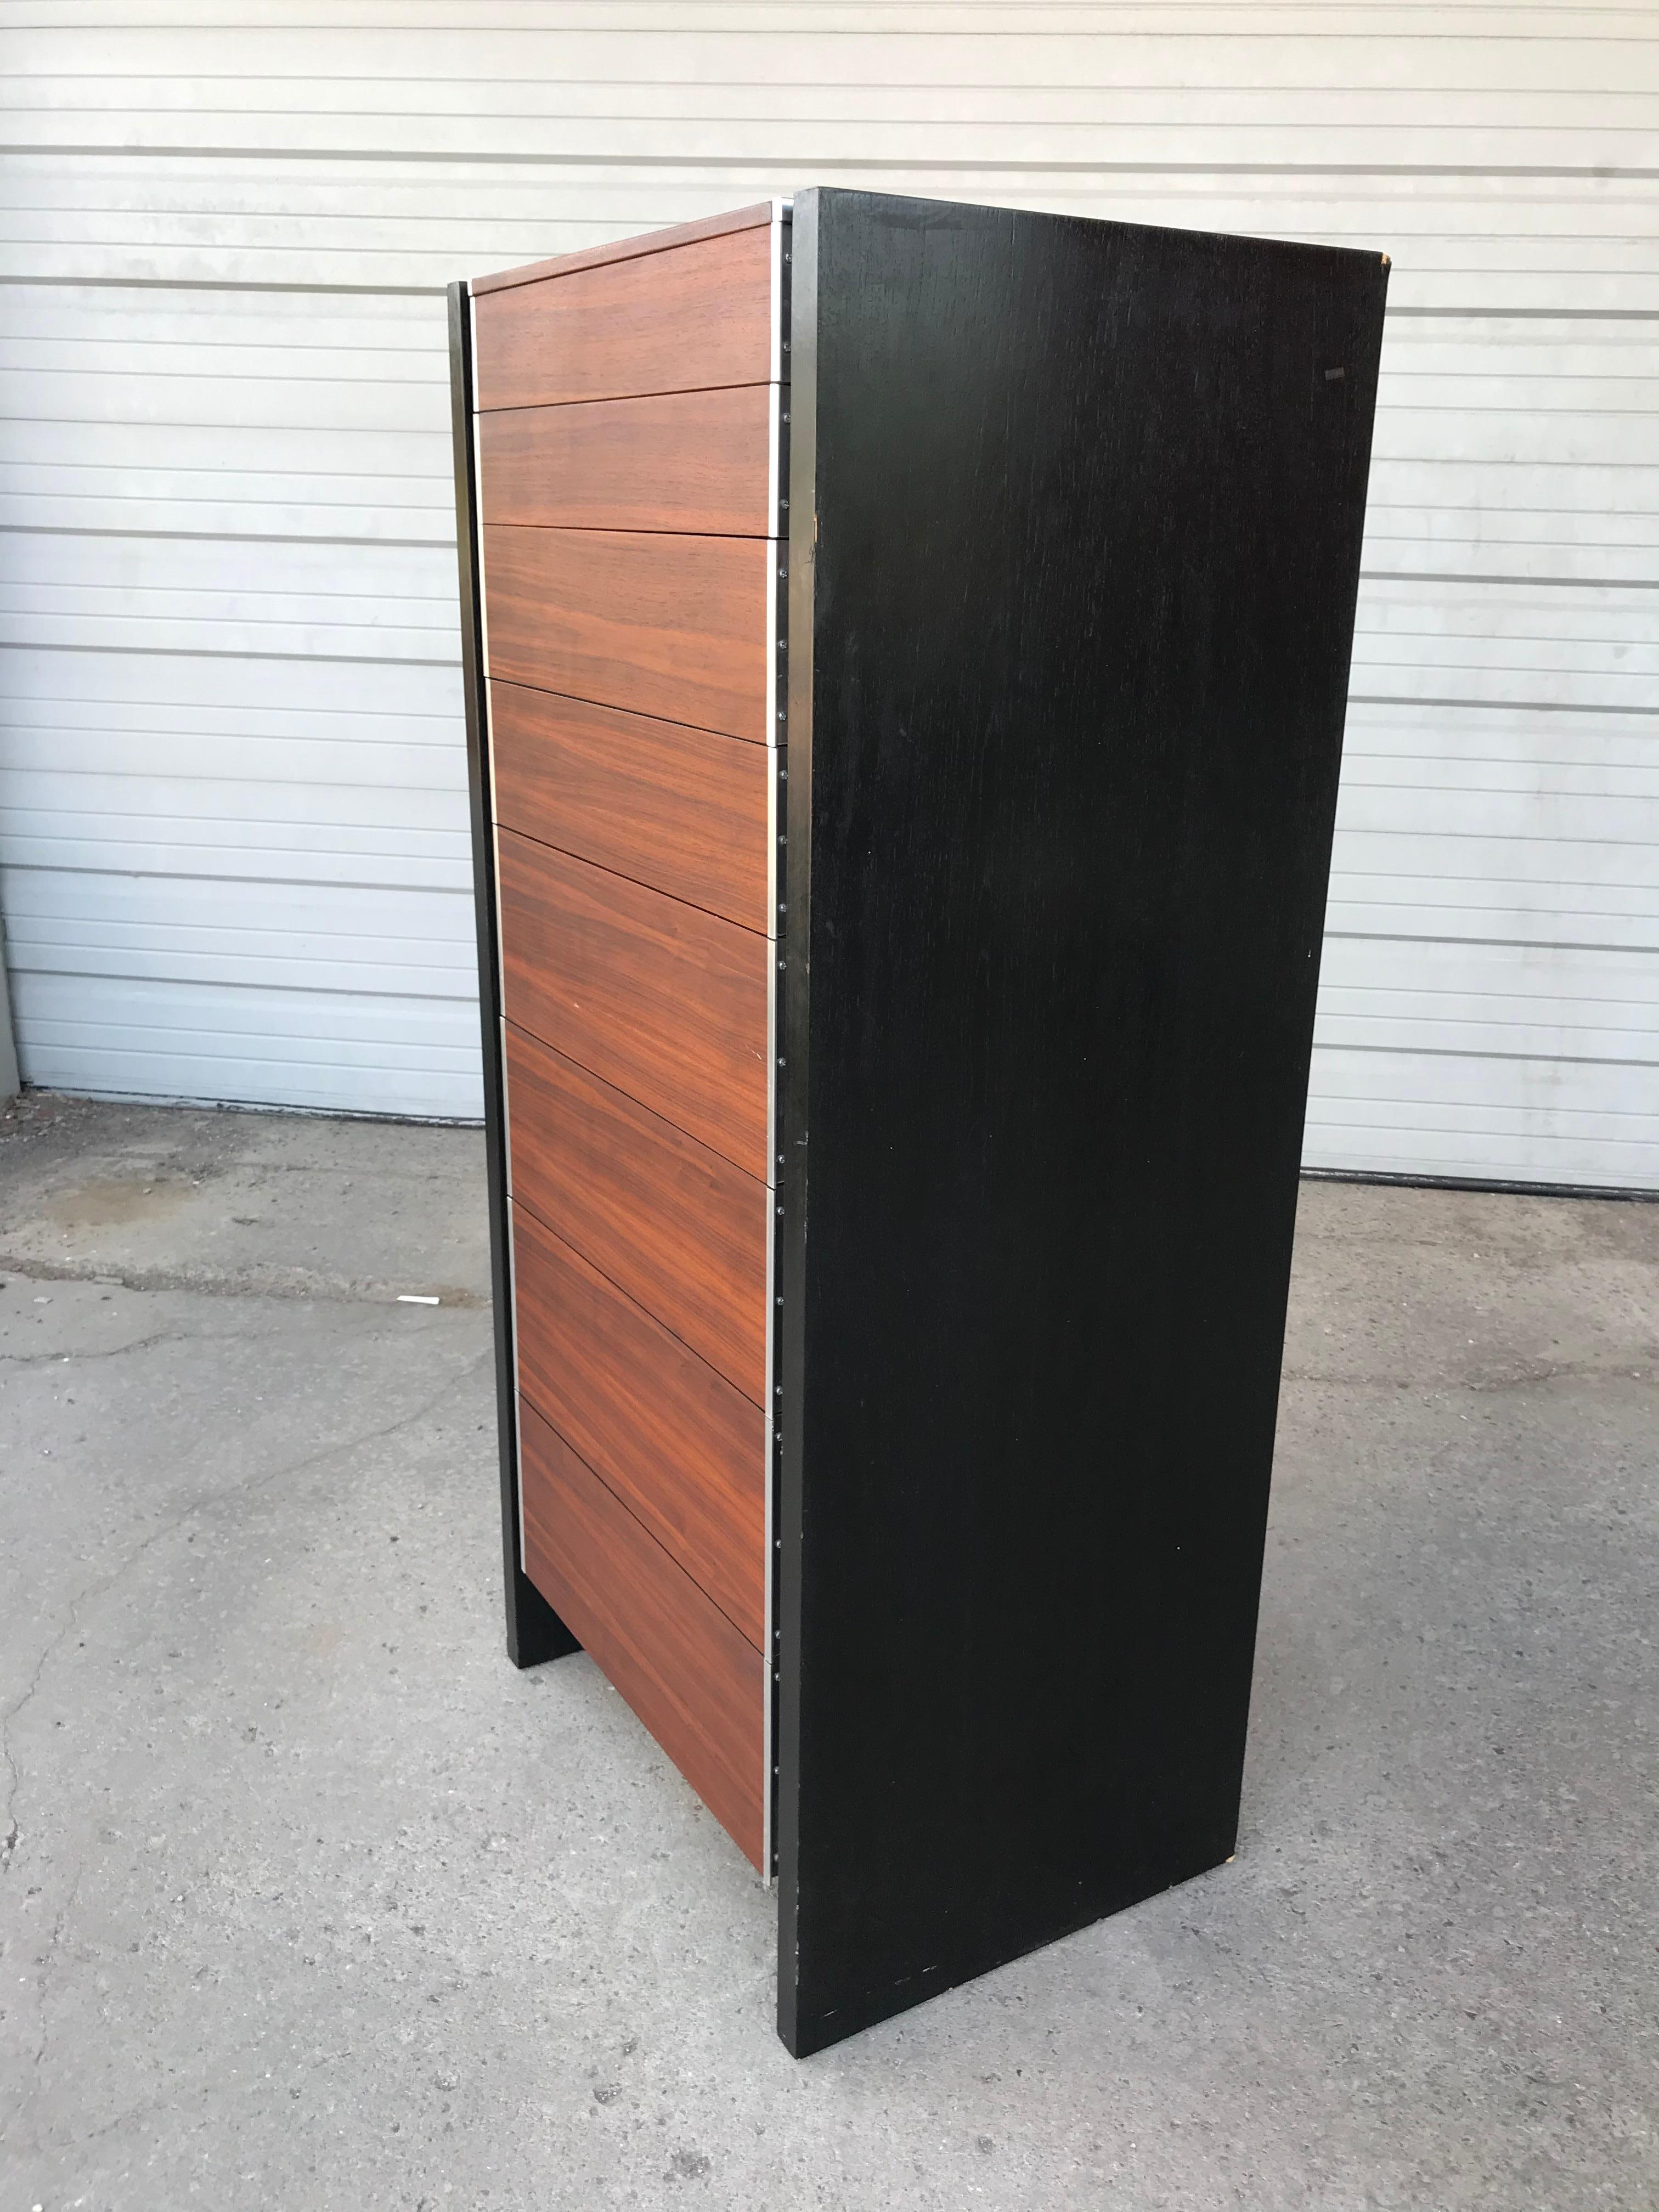 An exquisite Robert Baron for Glenn of California rosewood 8 Drawer chest, 1970. Ebonized oak side panels. figured Brazilian rosewood doors with inset chrome handles and trim. Maple interior. In great condition.